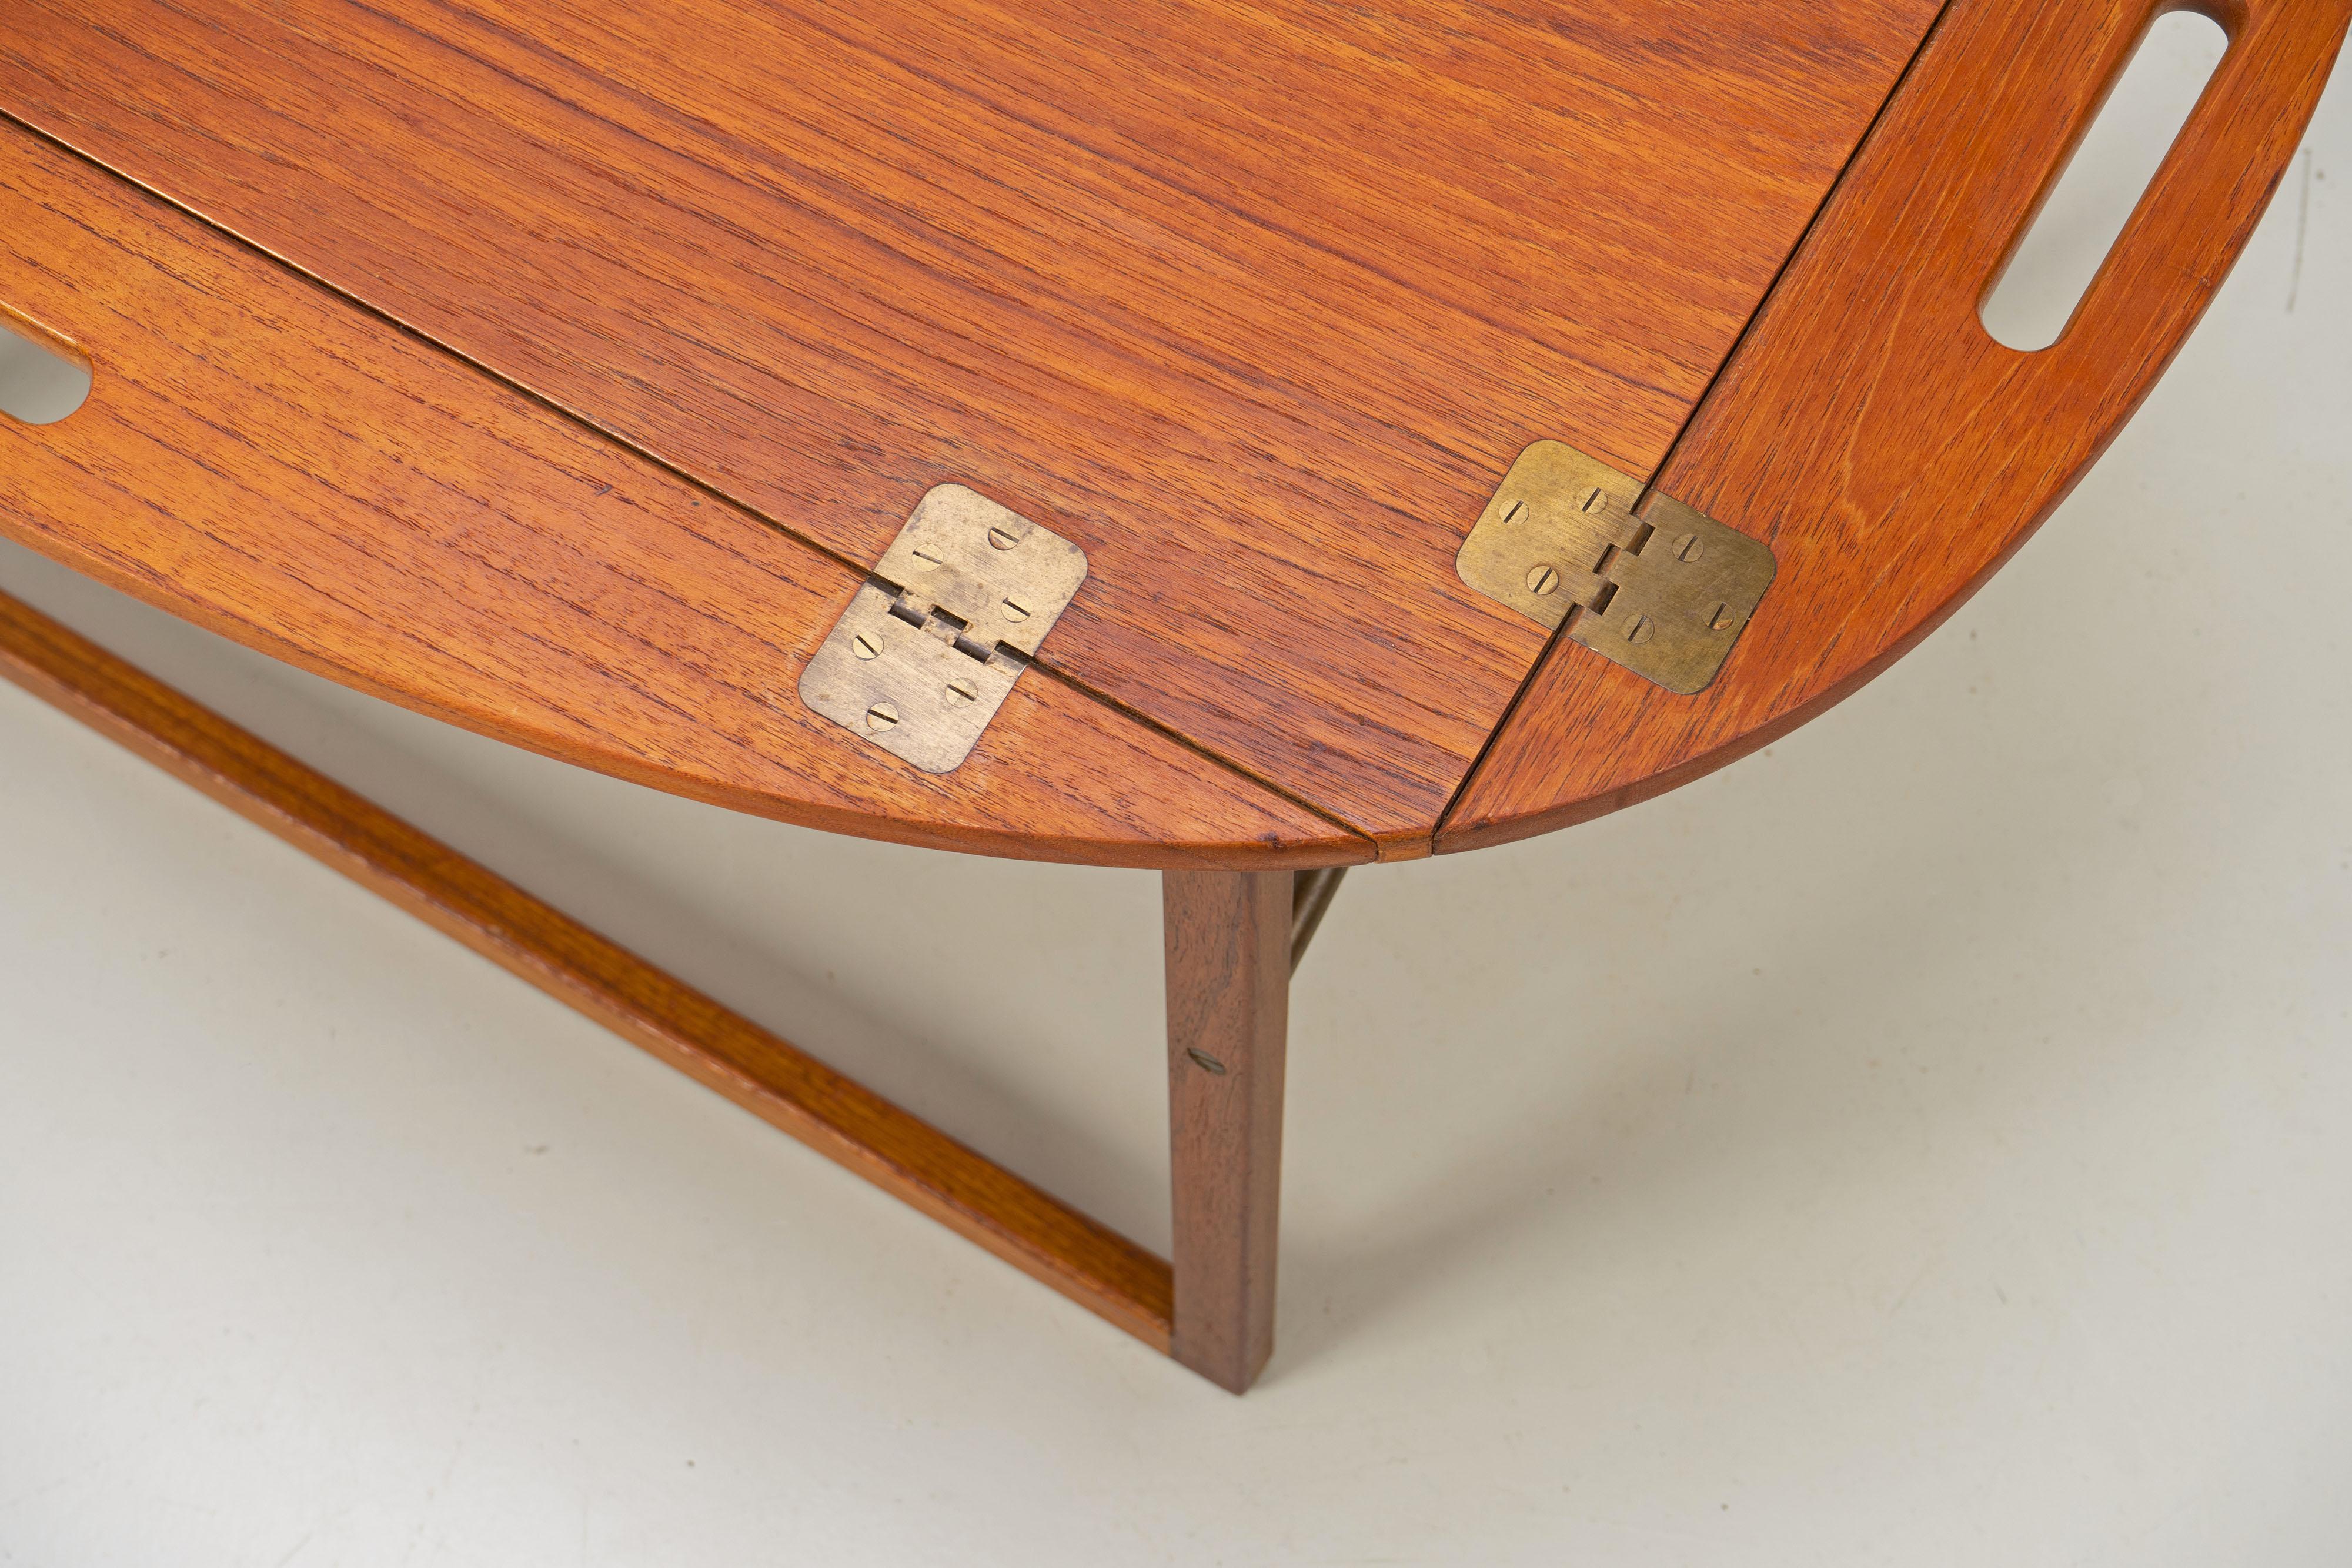 Danish Tray Table by Svend Langkilde for Illums Bolighus Teak and Brass, 1960s For Sale 5